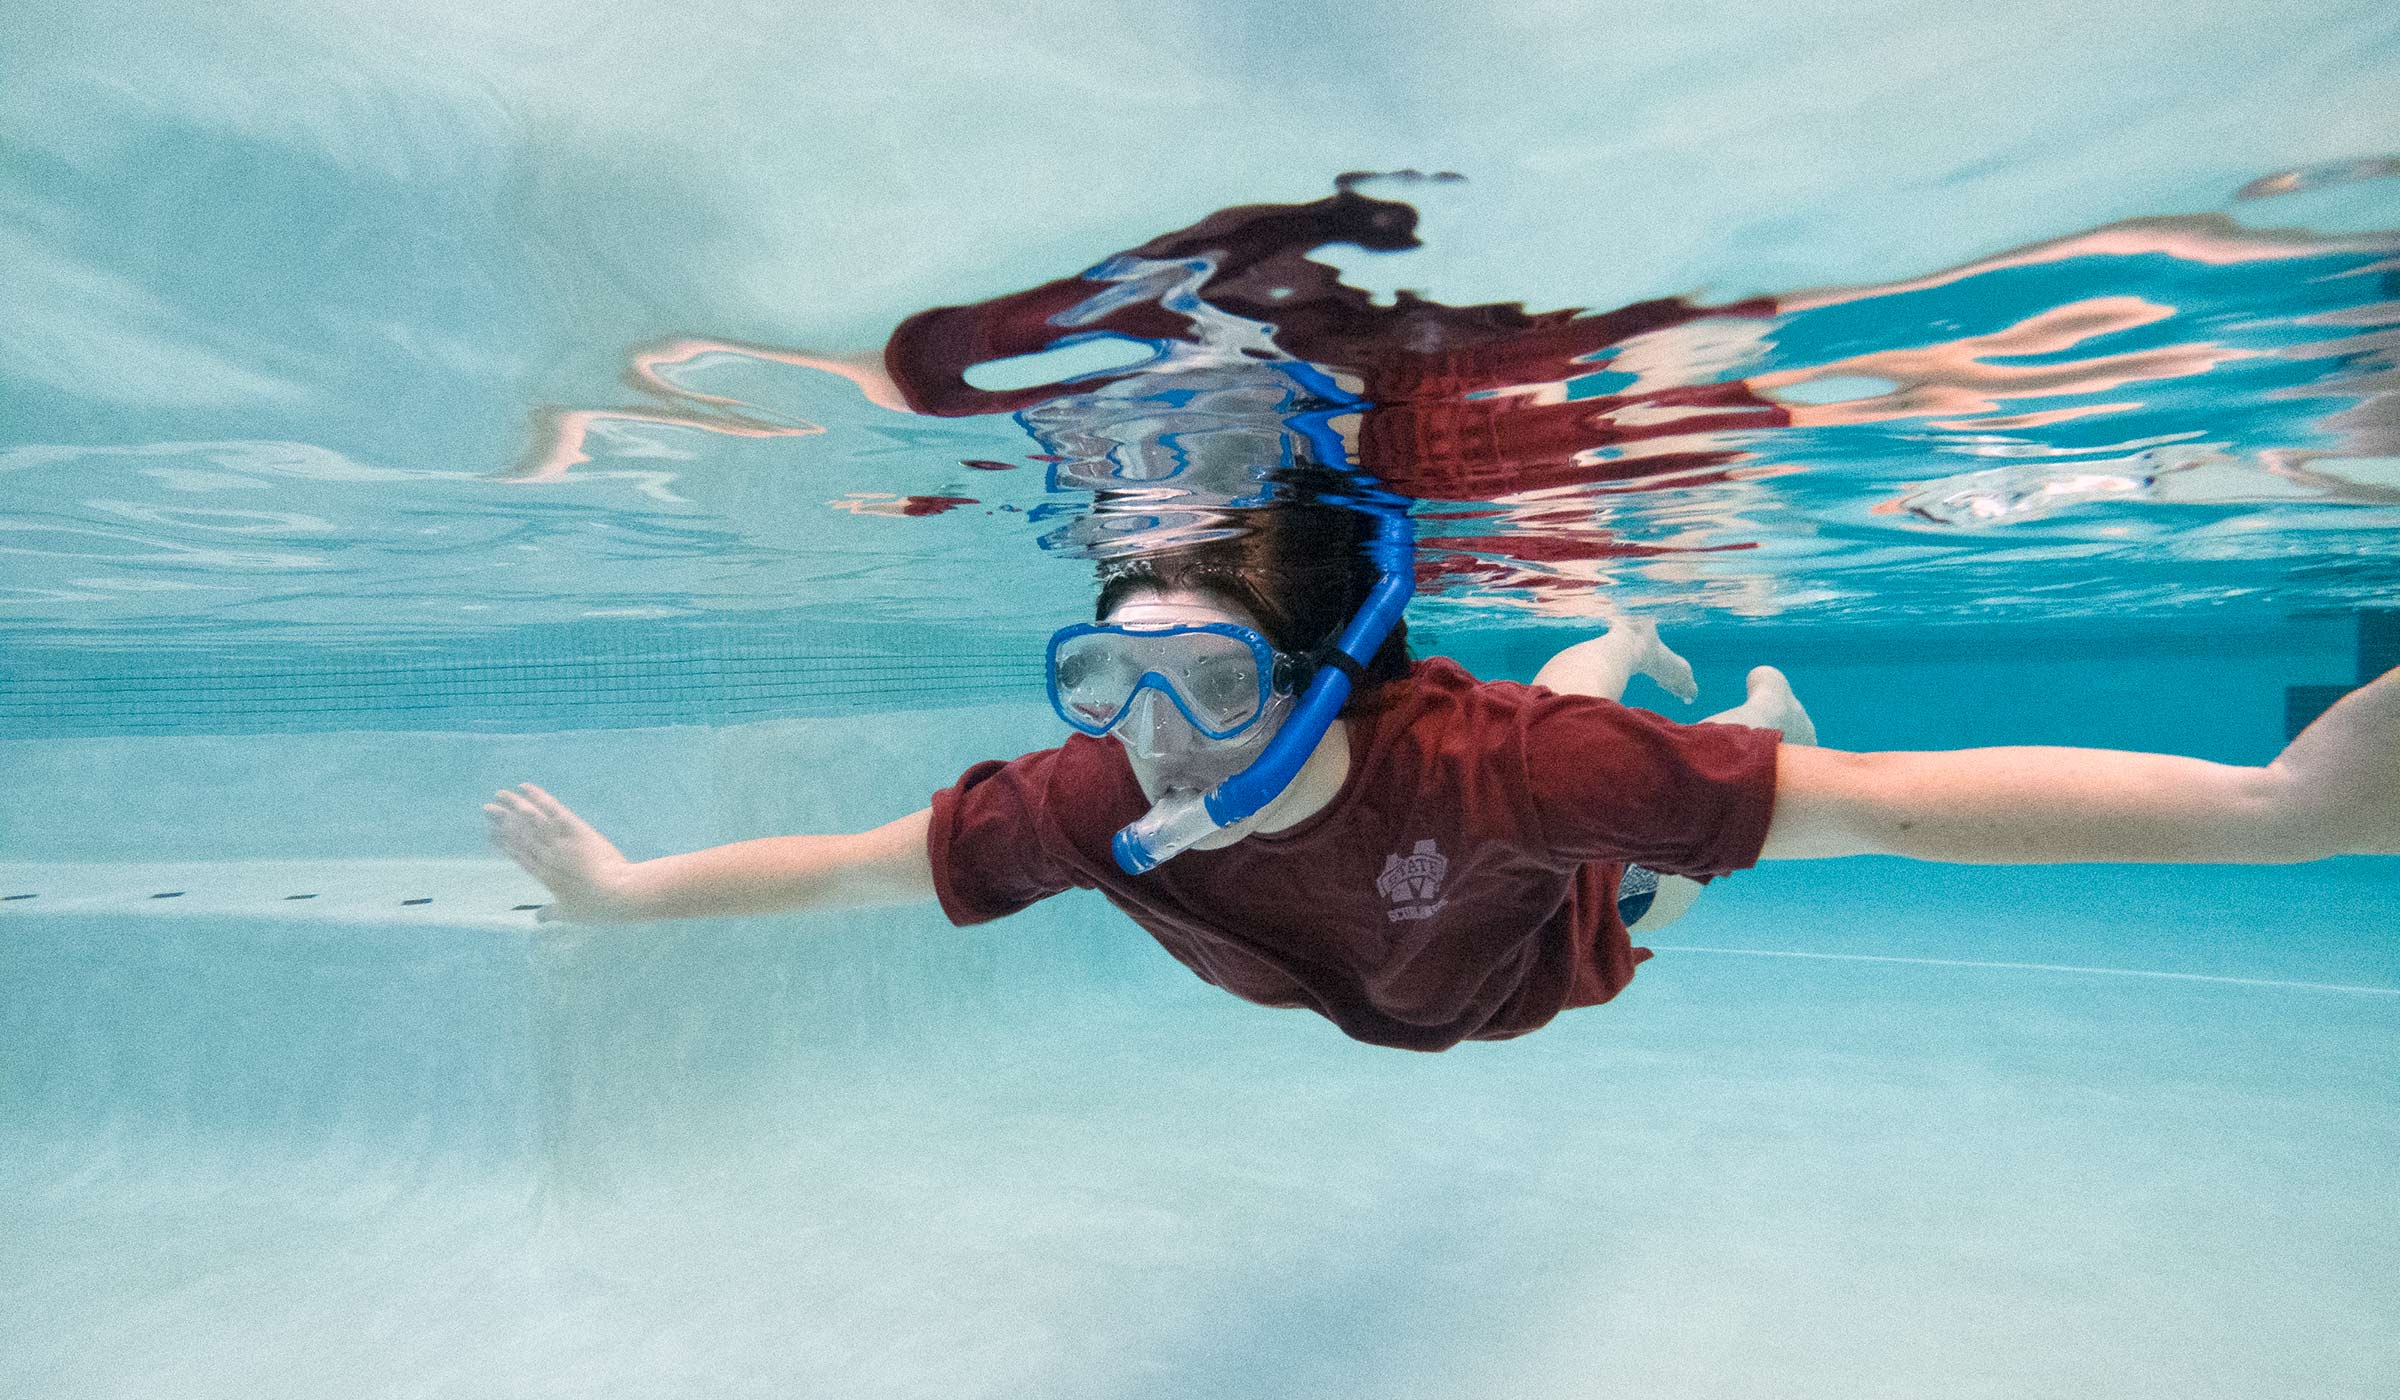 Katherine Walgamotte, pictured using a snorkle in the Sanderson Center pool.